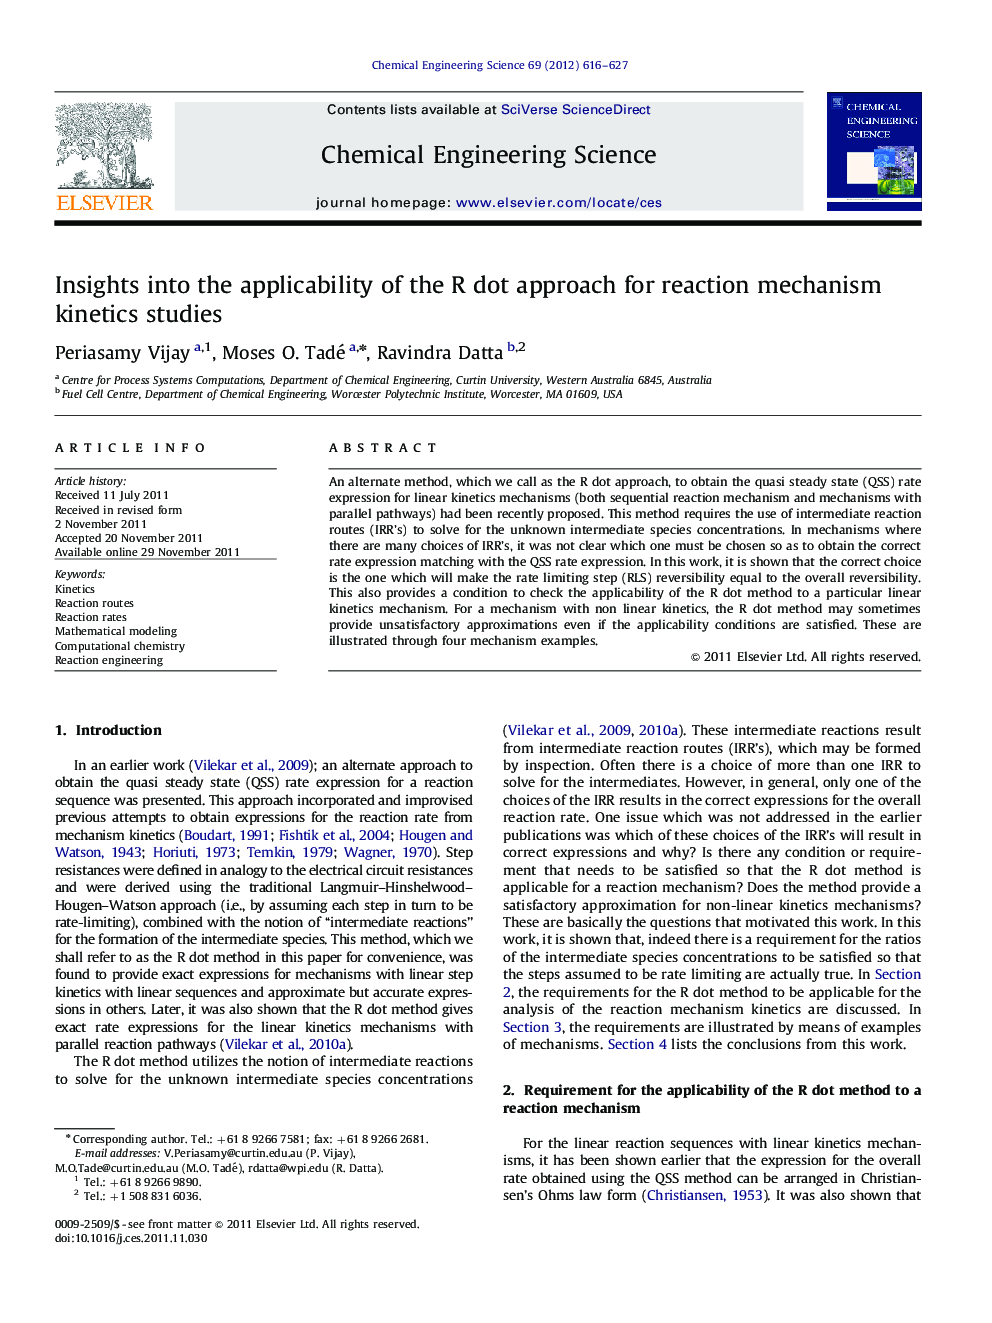 Insights into the applicability of the R dot approach for reaction mechanism kinetics studies